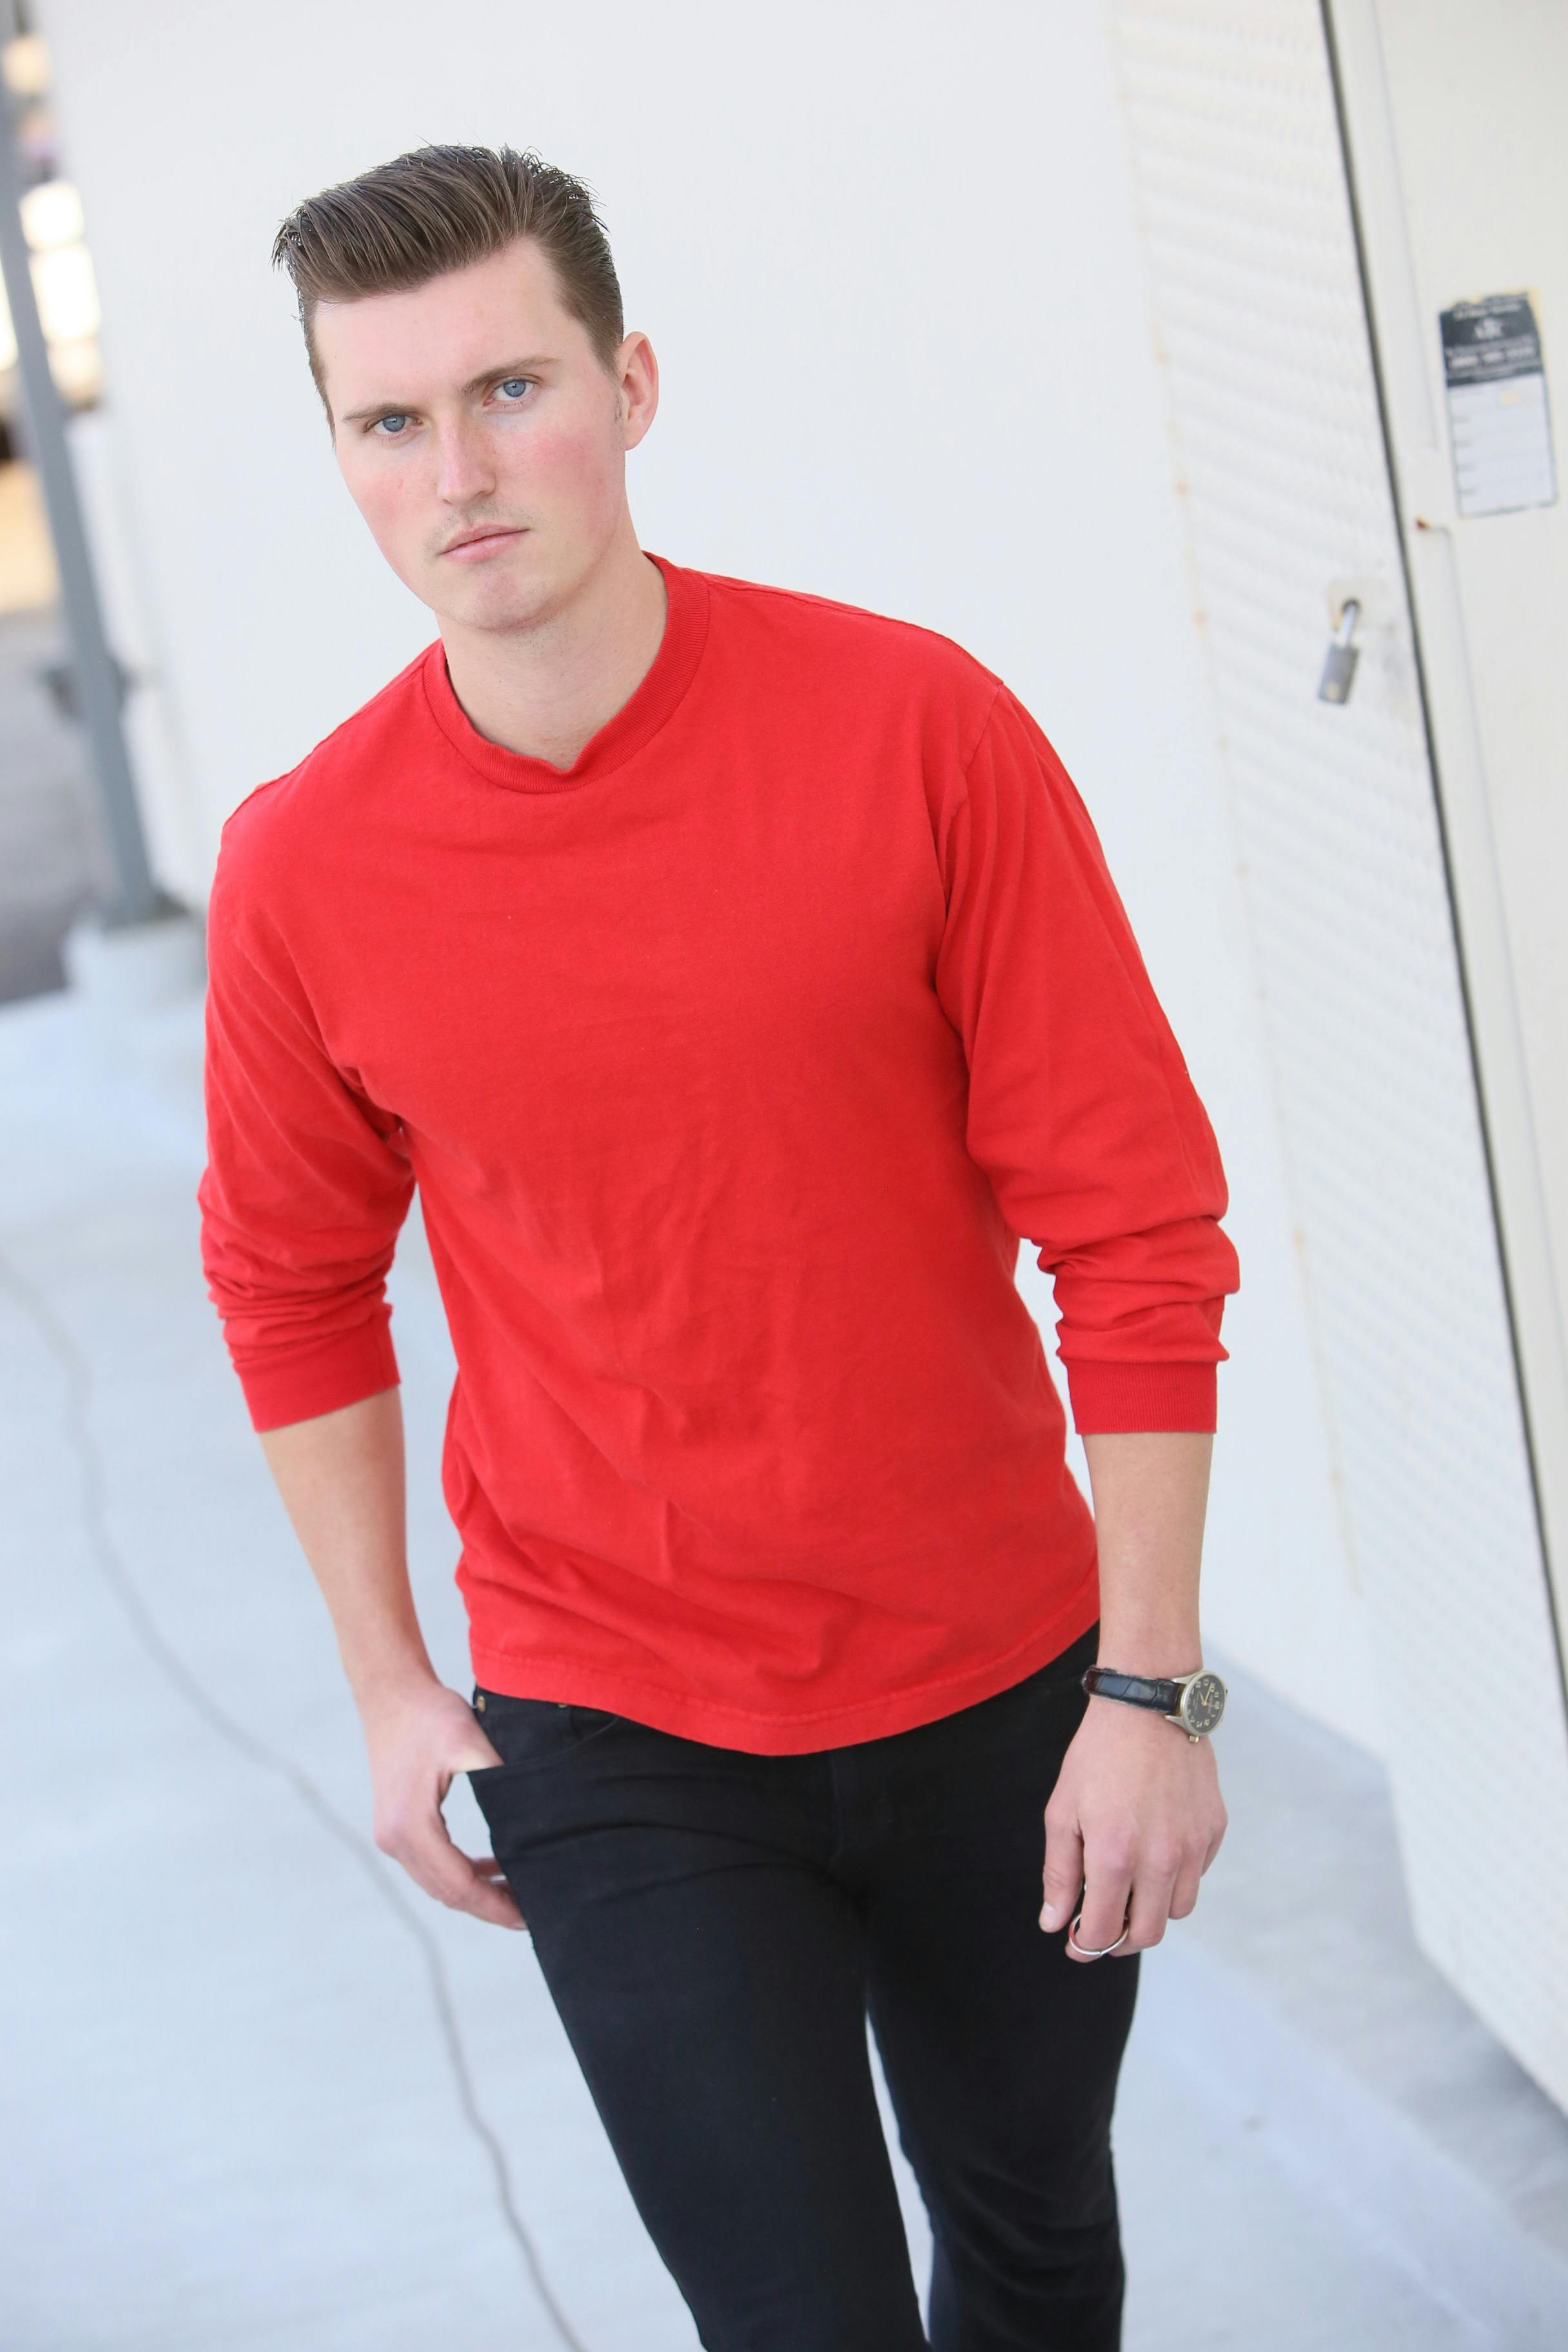 White Pants with Red Shirt Outfits For Men In Their 20s 6 ideas  outfits   Lookastic